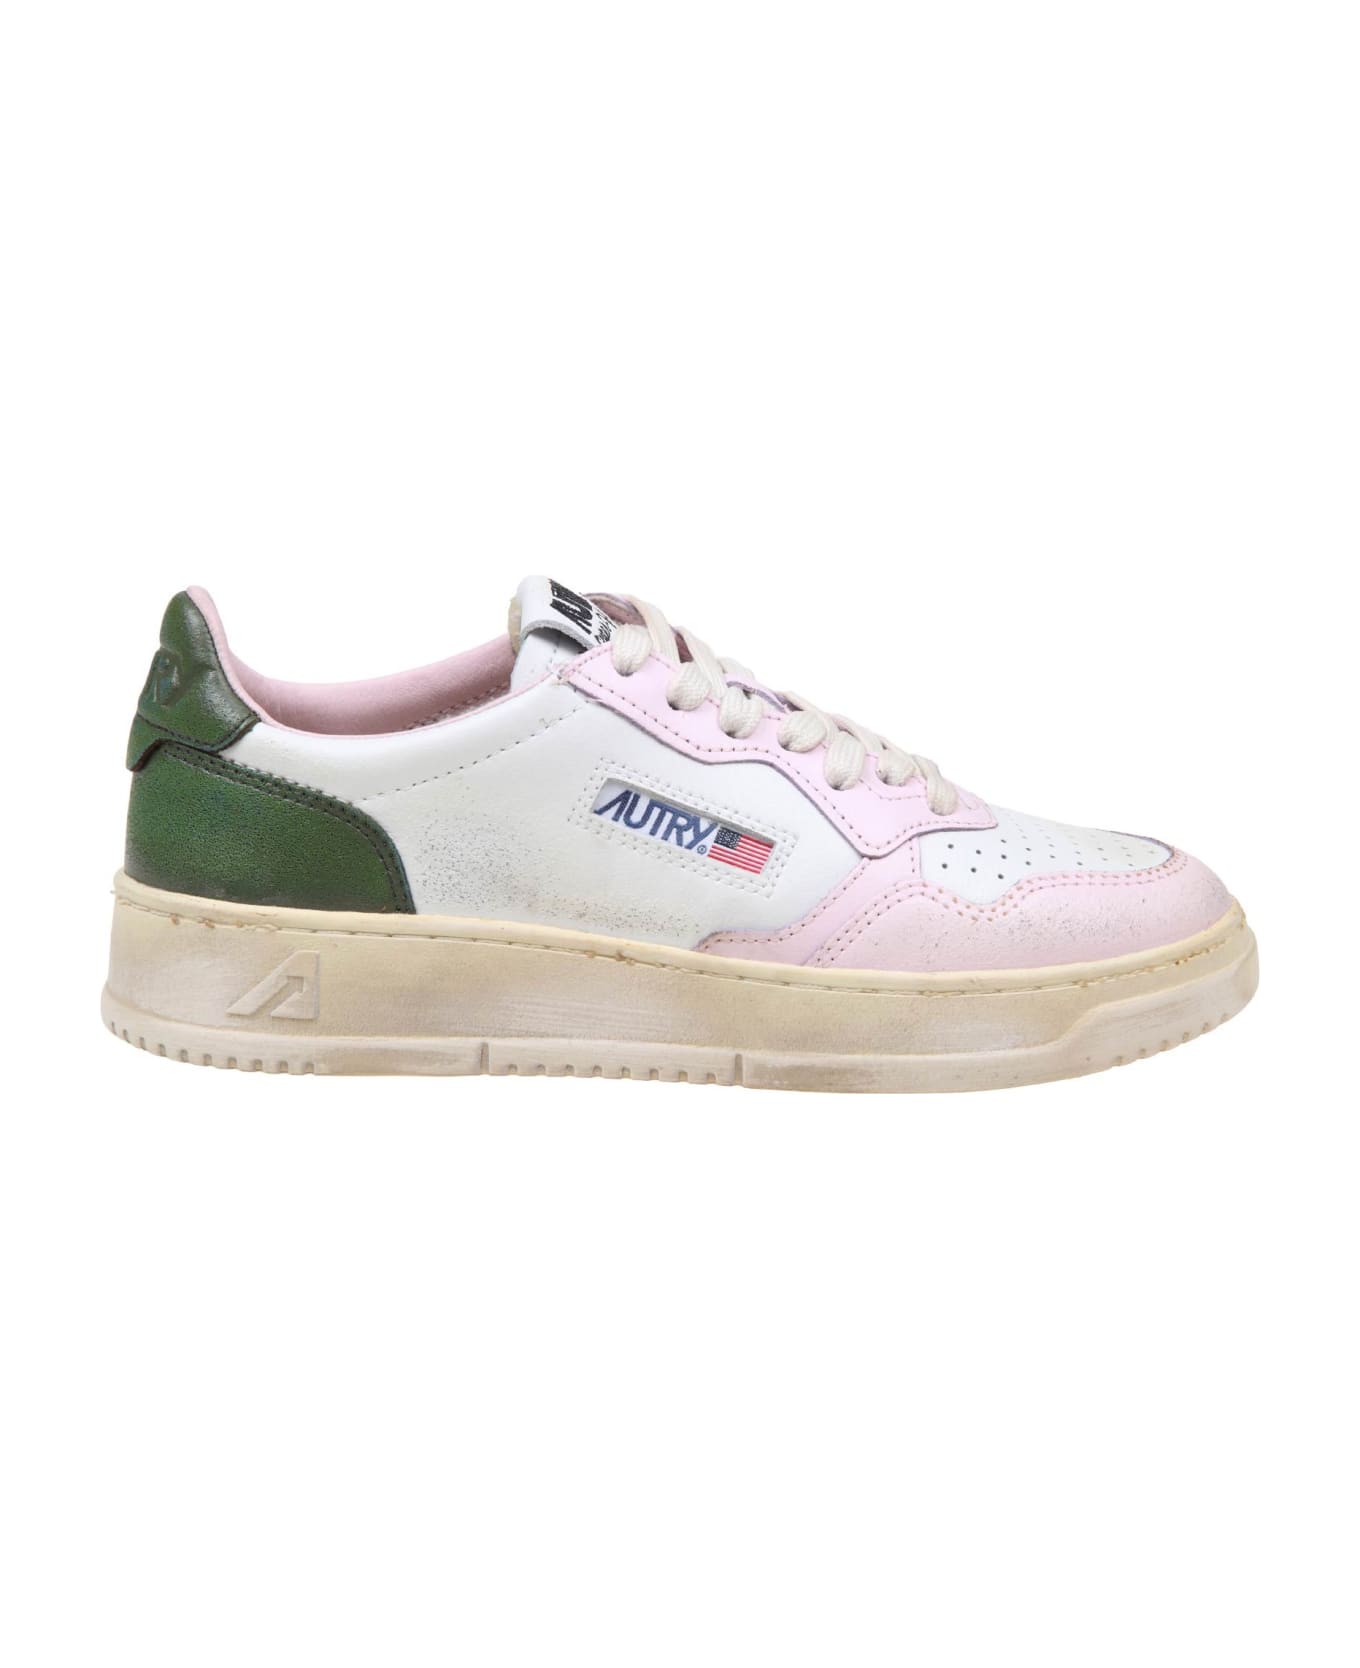 Autry Vintage Leather Sneakers - White/Lilac